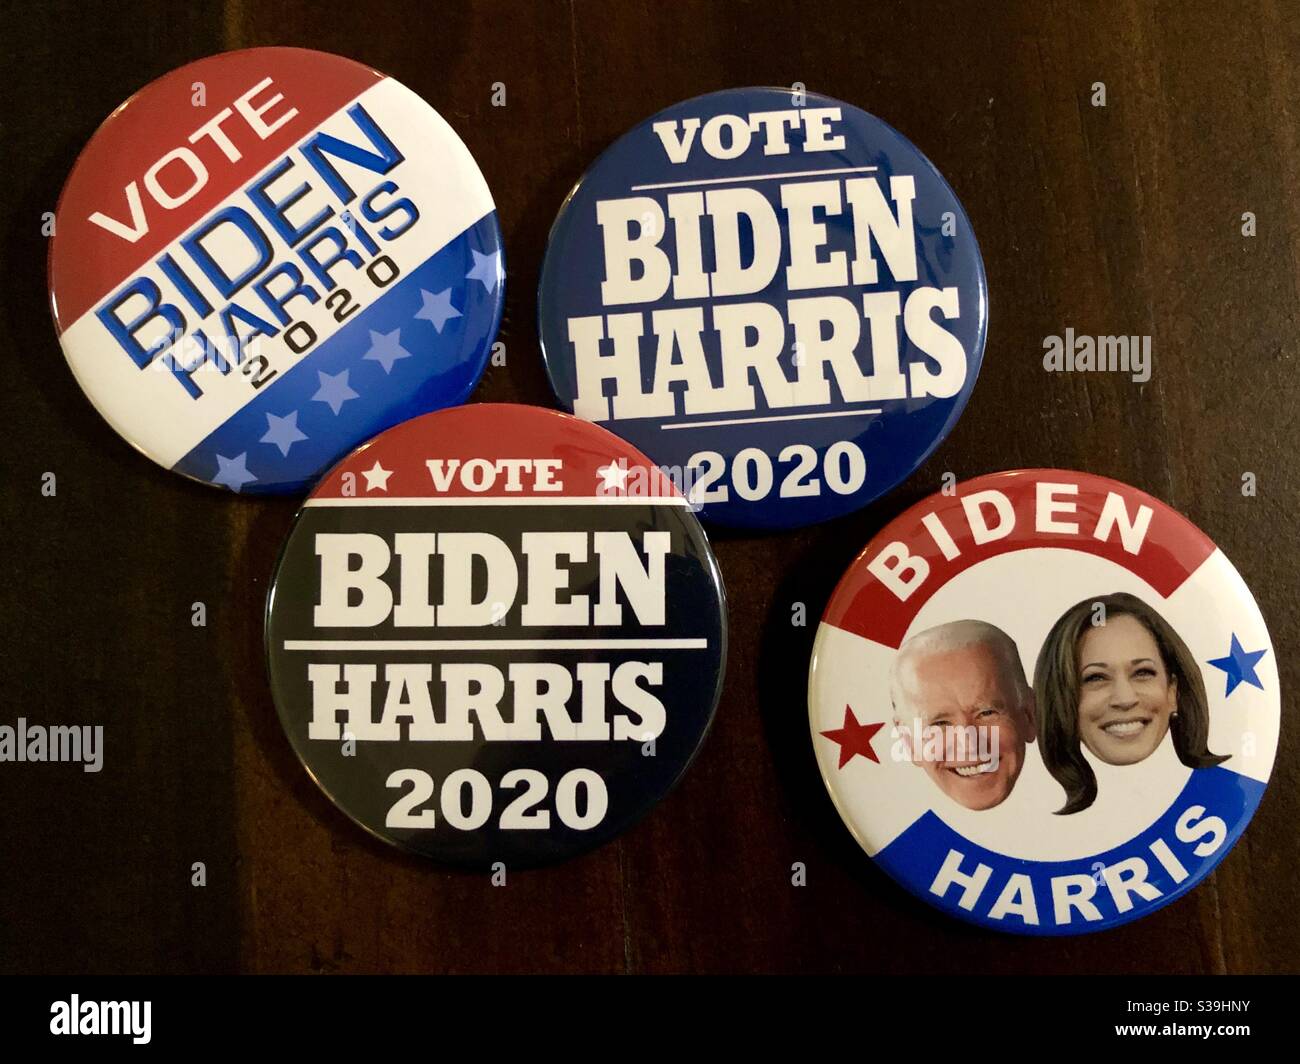 Campaign buttons for the 2020 United States presidential election for the Democratic candidates Joe Biden for President and Kamala Harris for VP. Stock Photo